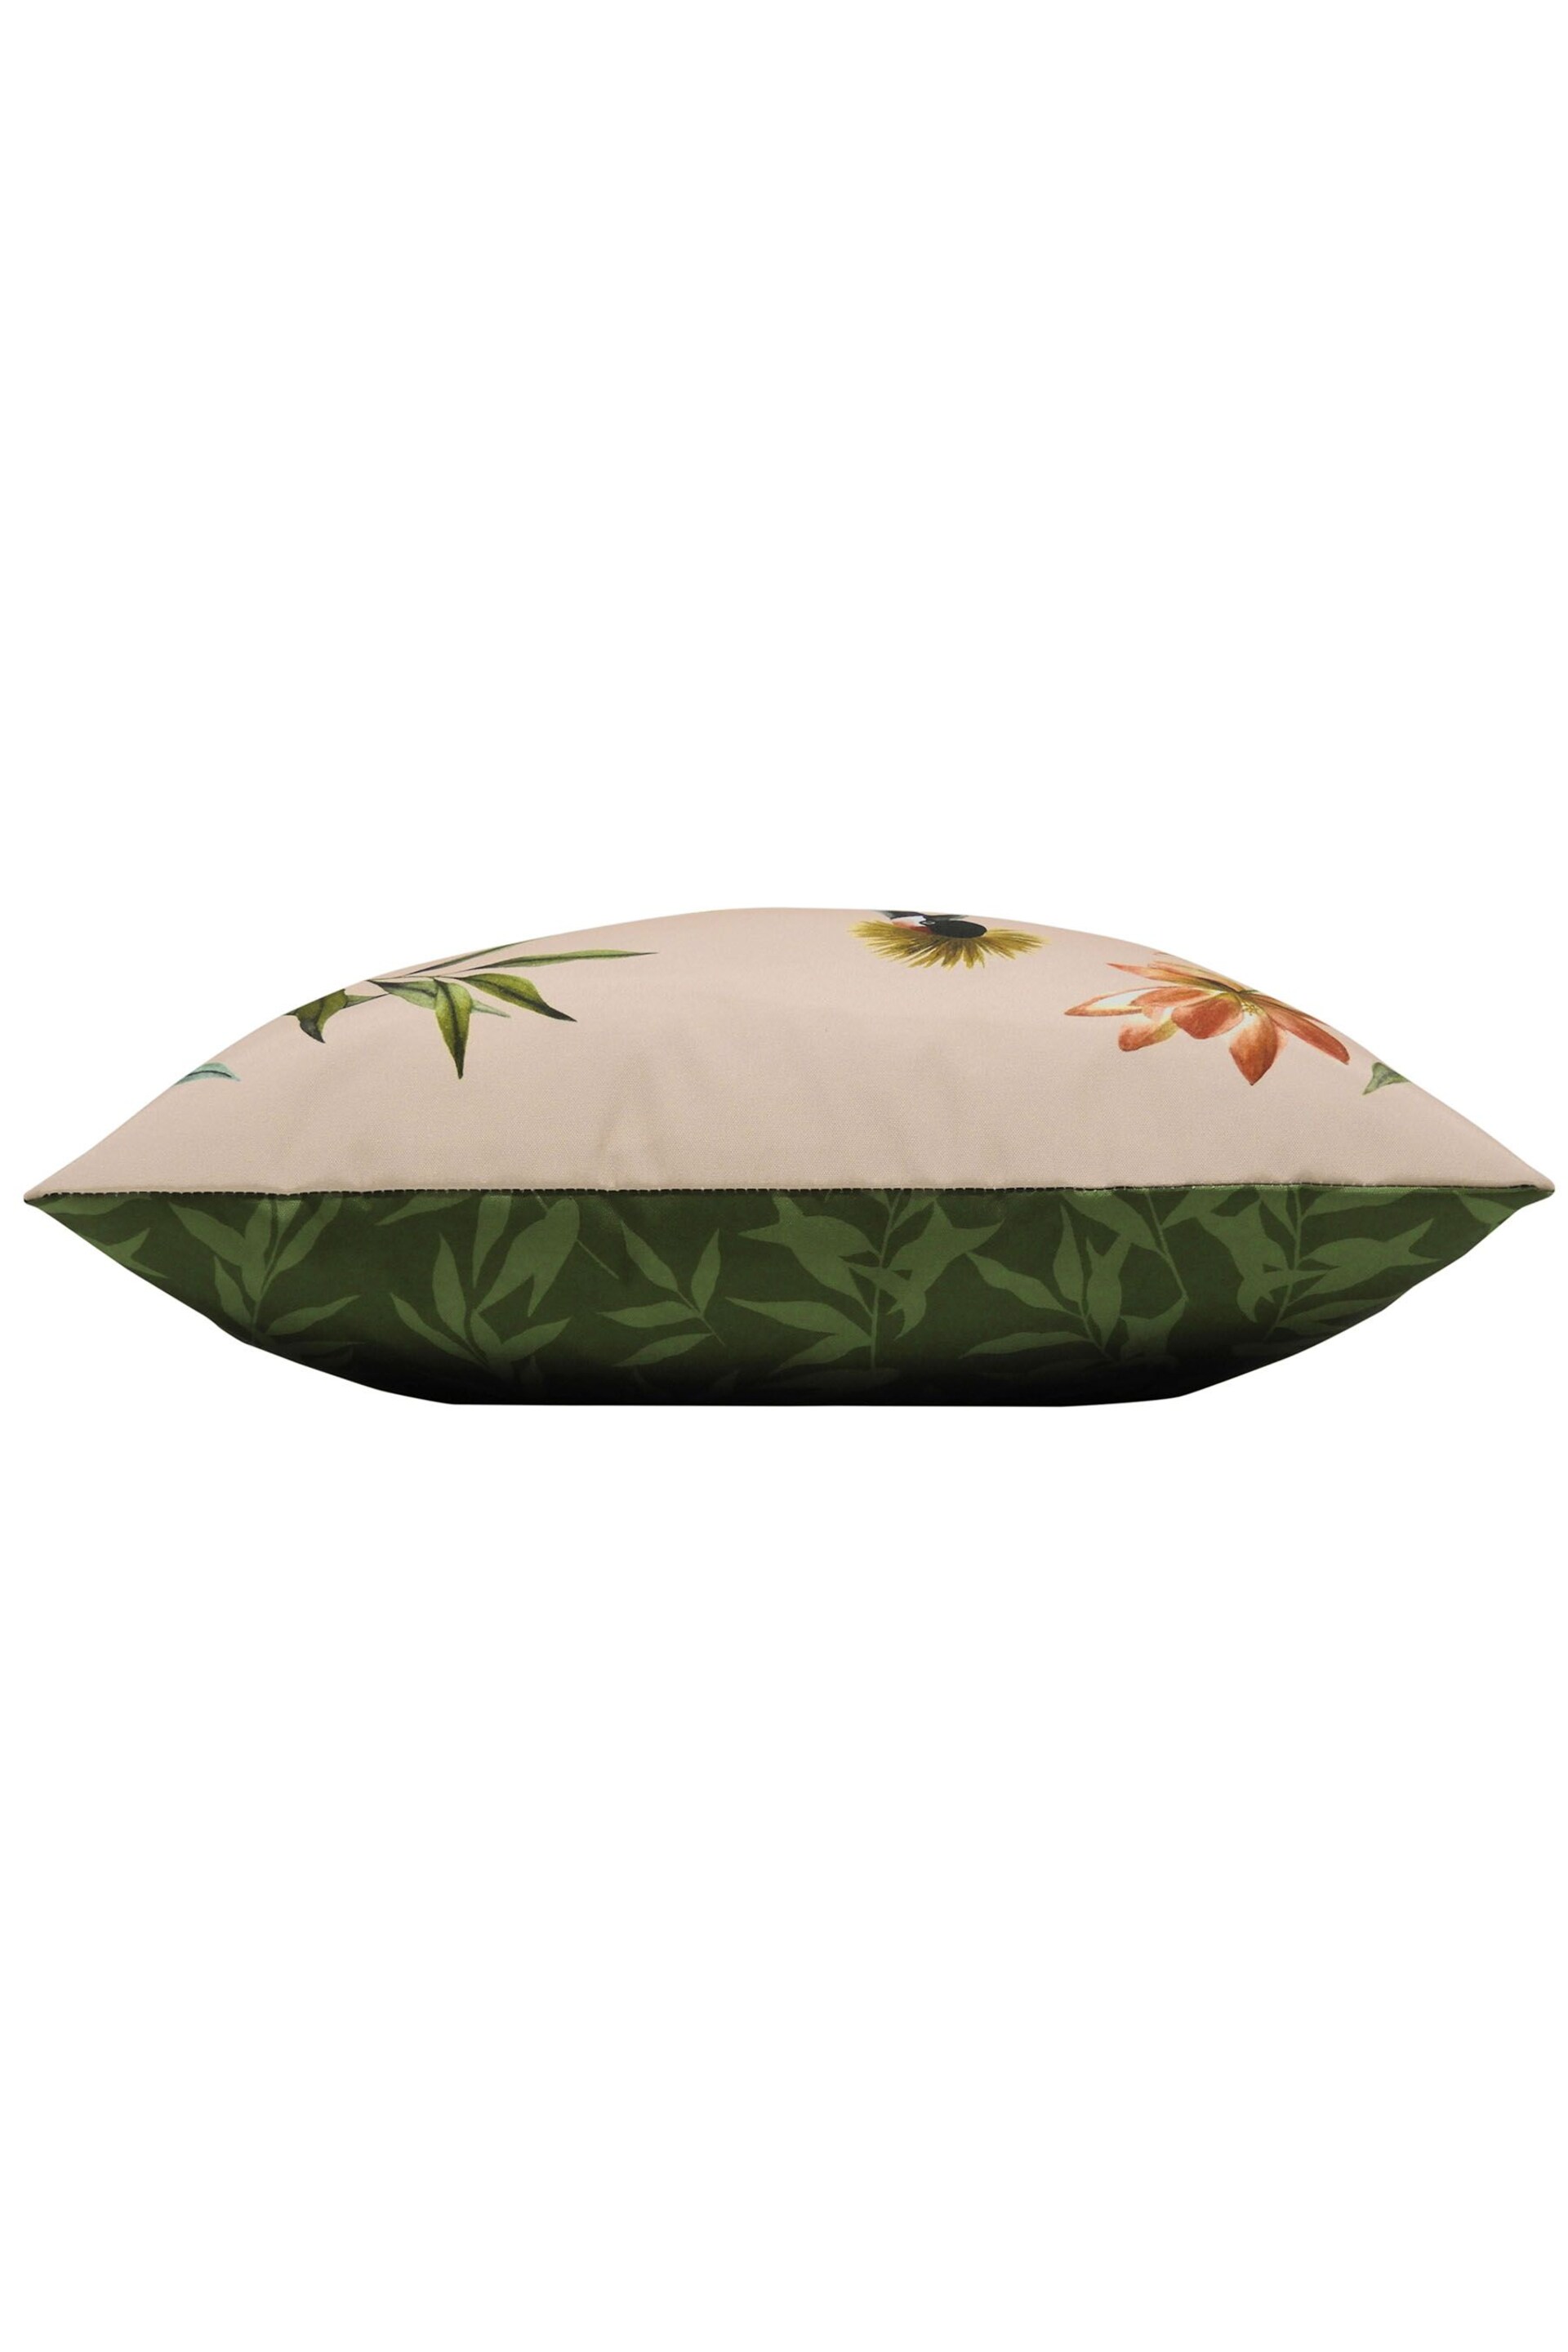 Evans Lichfield Blush Pink/Forest Green Cranes Outdoor Polyester Filled Cushion - Image 4 of 5